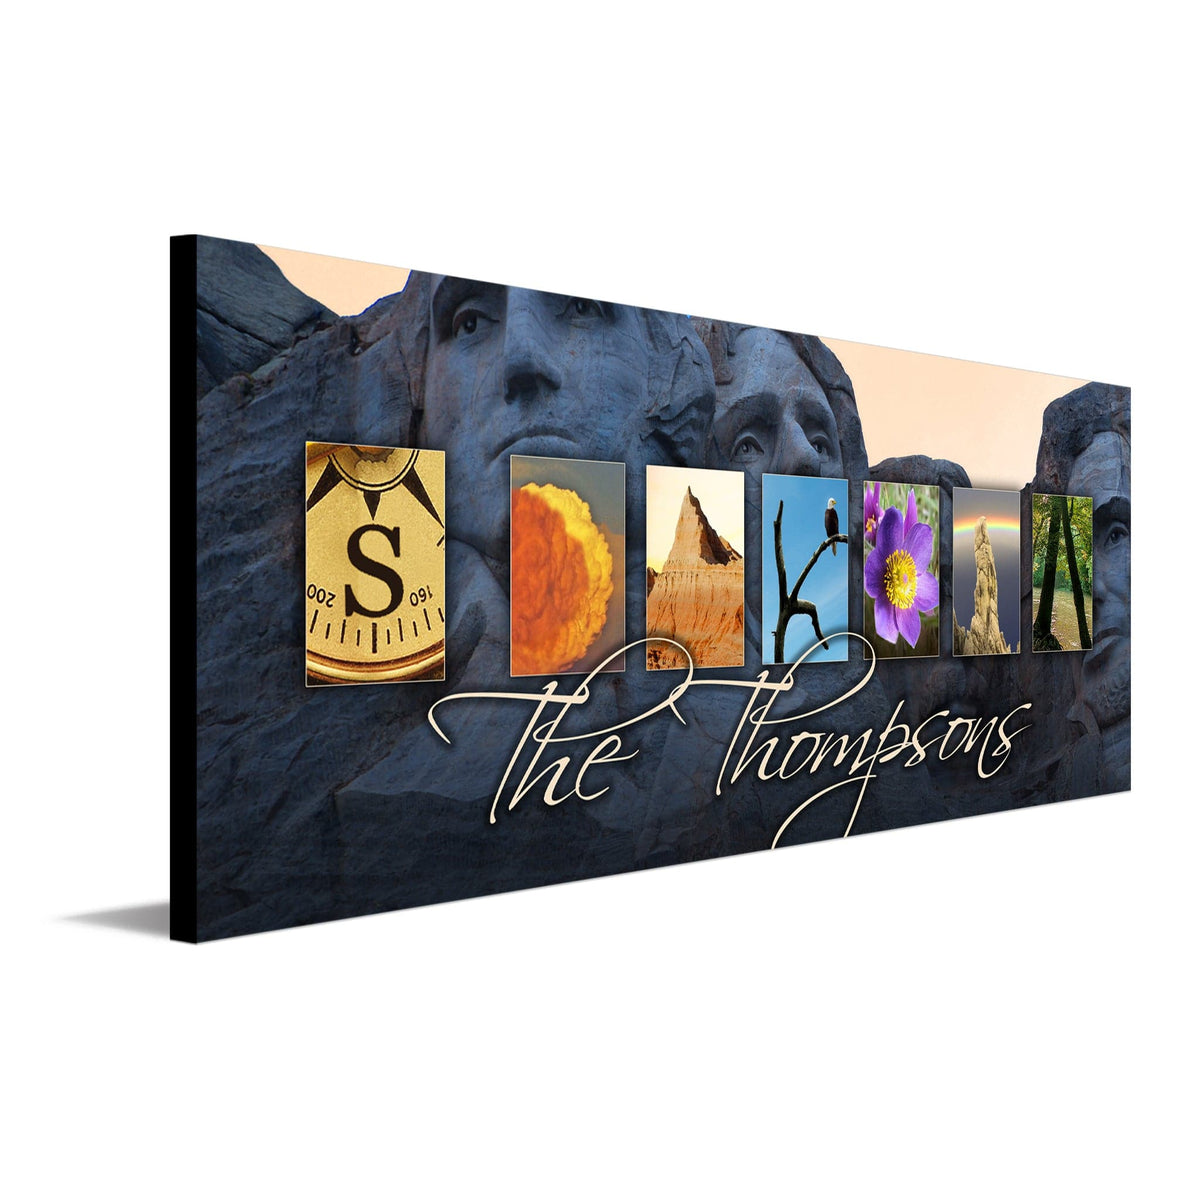 Personalized South Dakota wall art using images to spell the words South Dakota - Personal-Prints